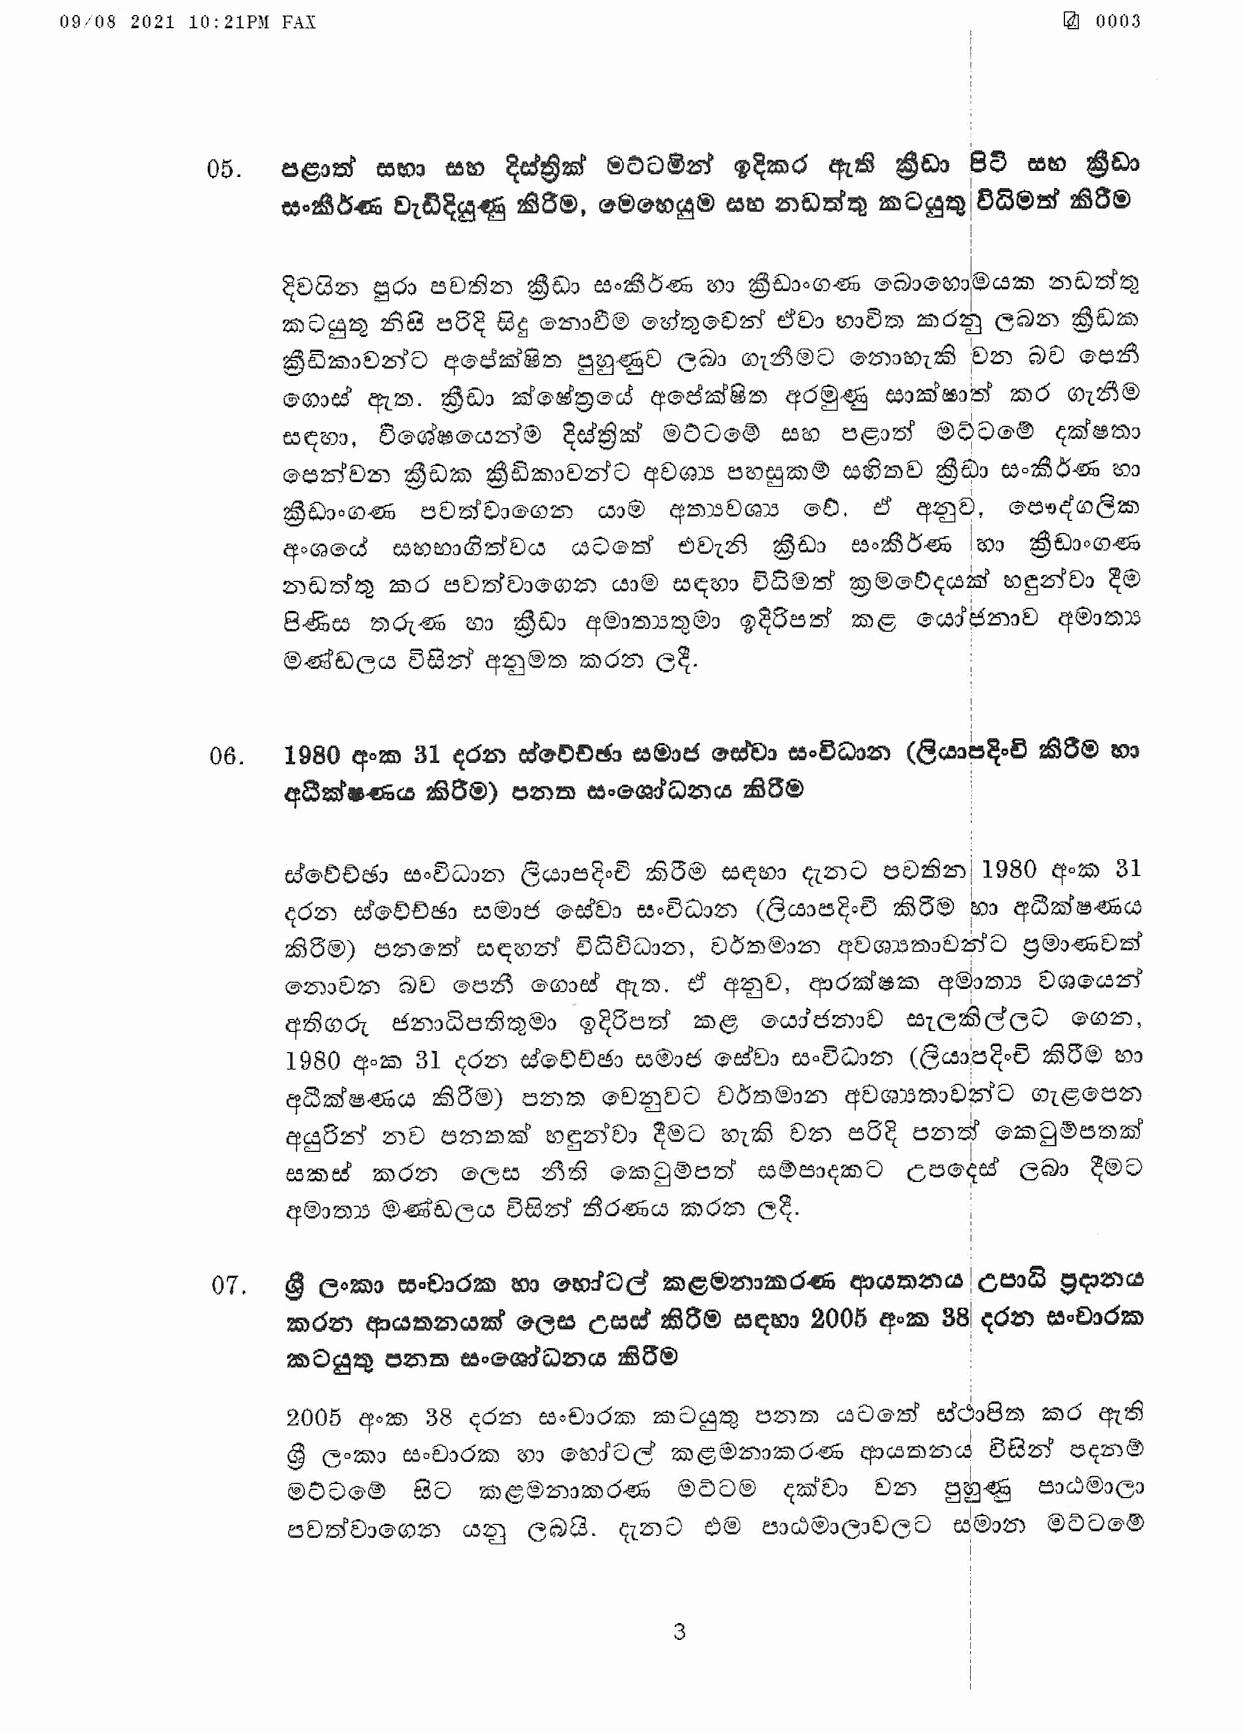 Cabinet Decision on 09.08.2021 page 003